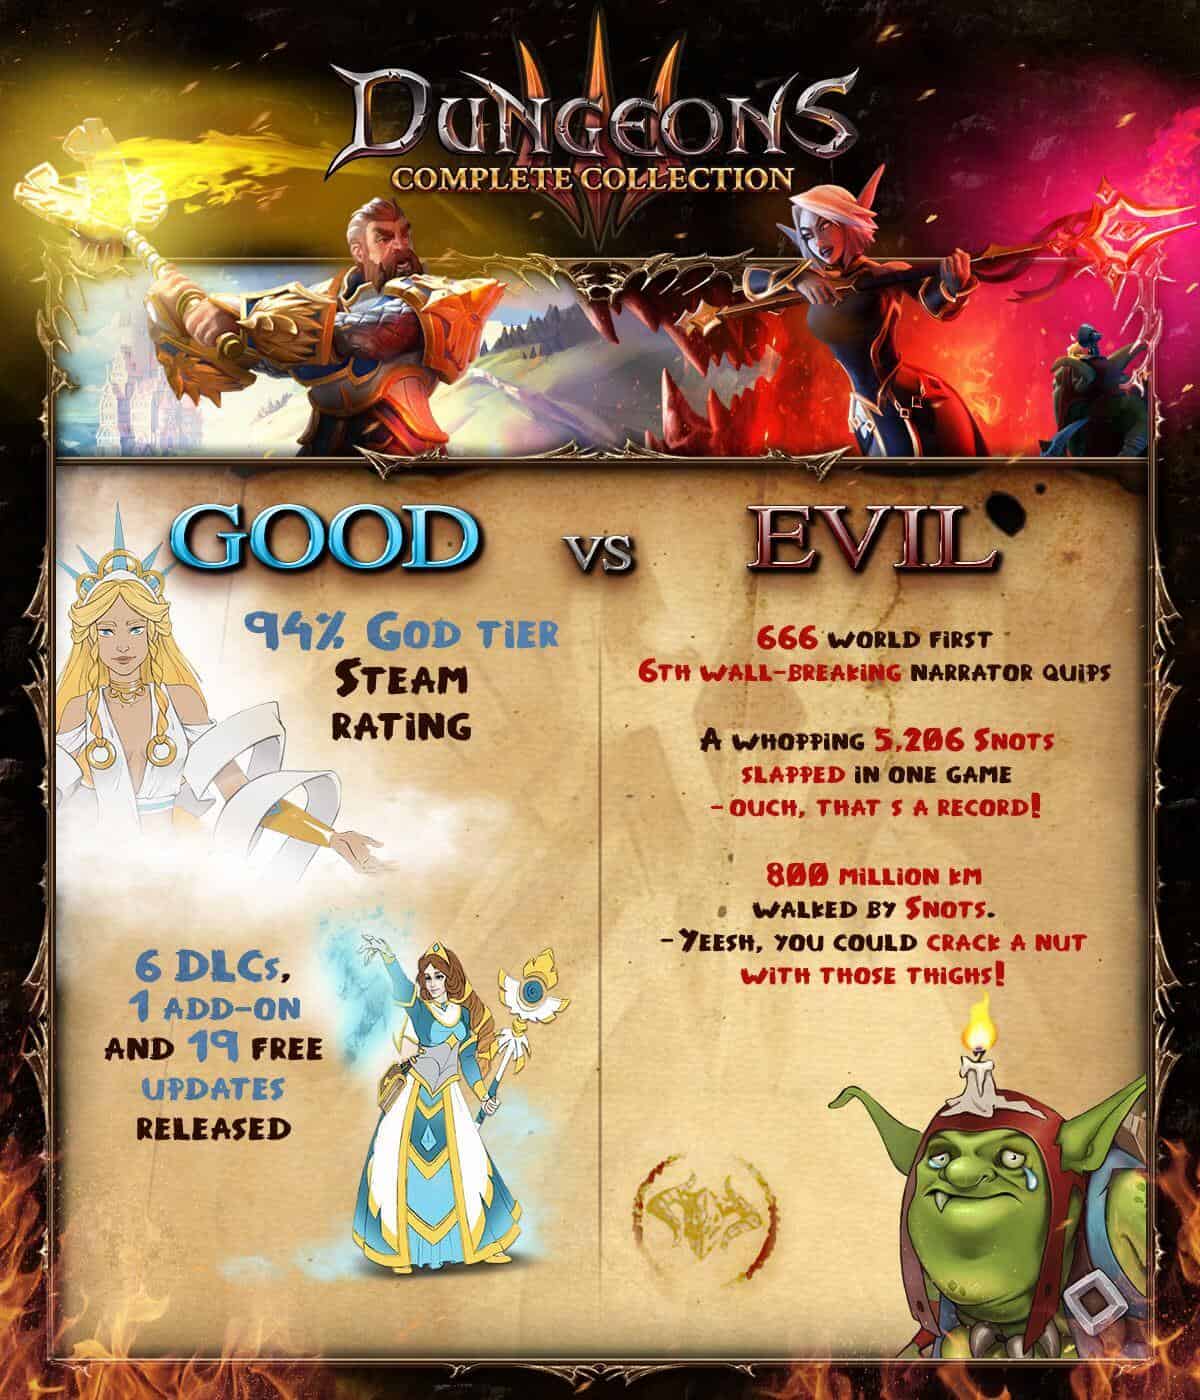 Dungeons 3 - Complete Collection infografía